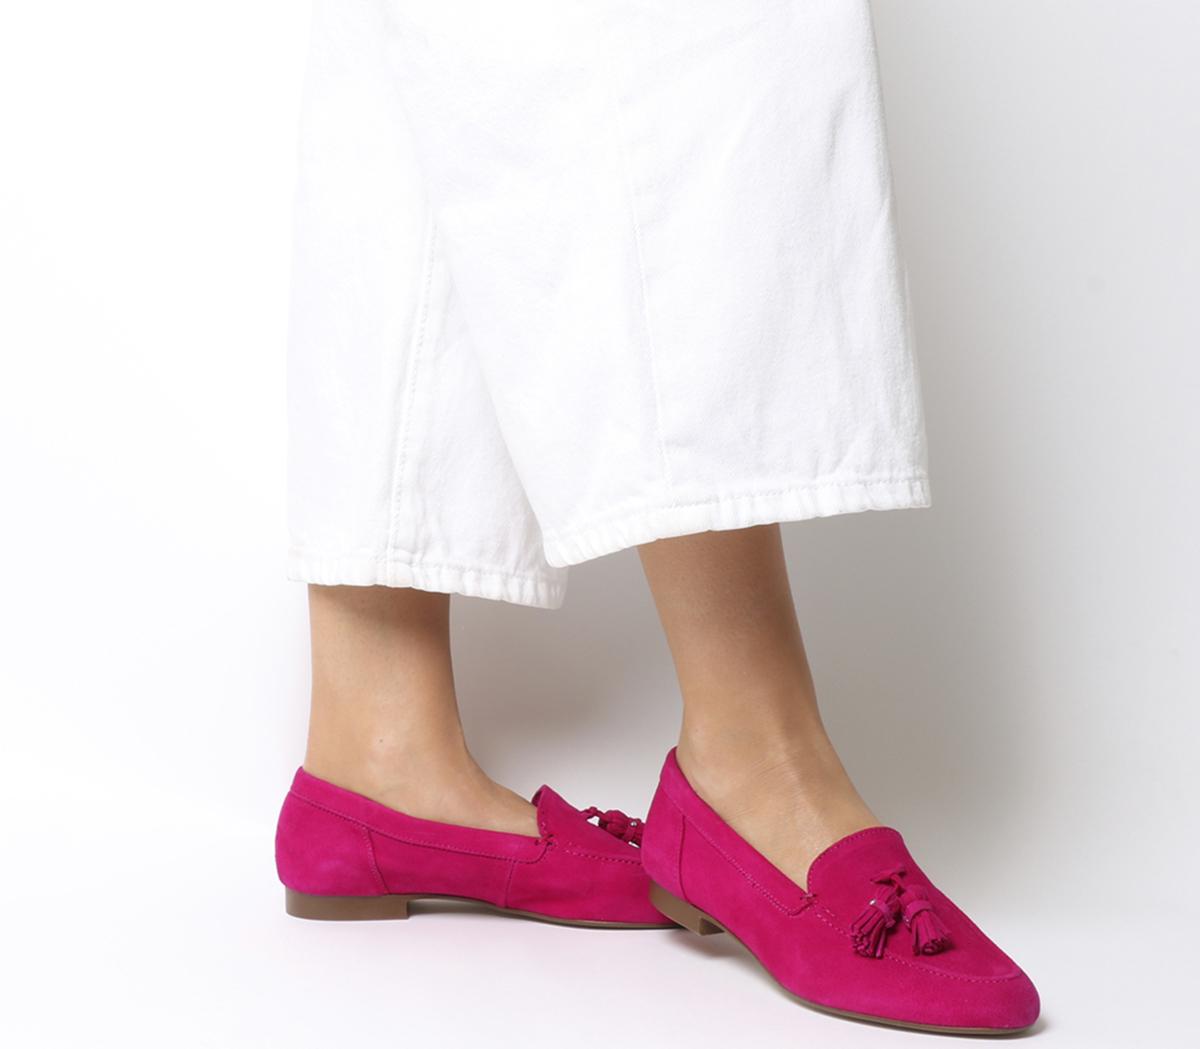 OFFICERetro Tassel LoafersBright Pink Suede